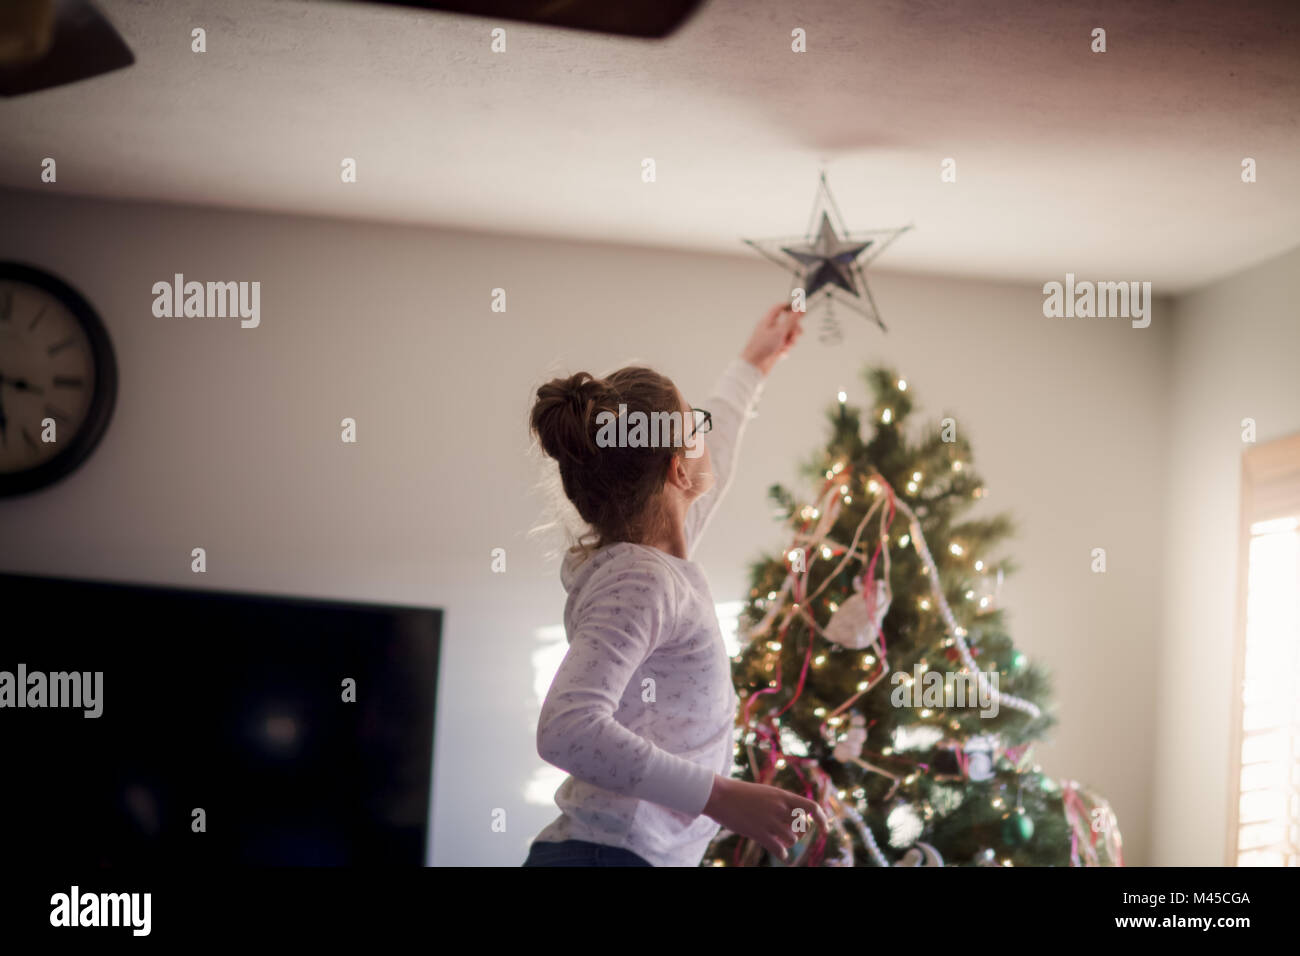 Girl putting up Christmas decorations Banque D'Images